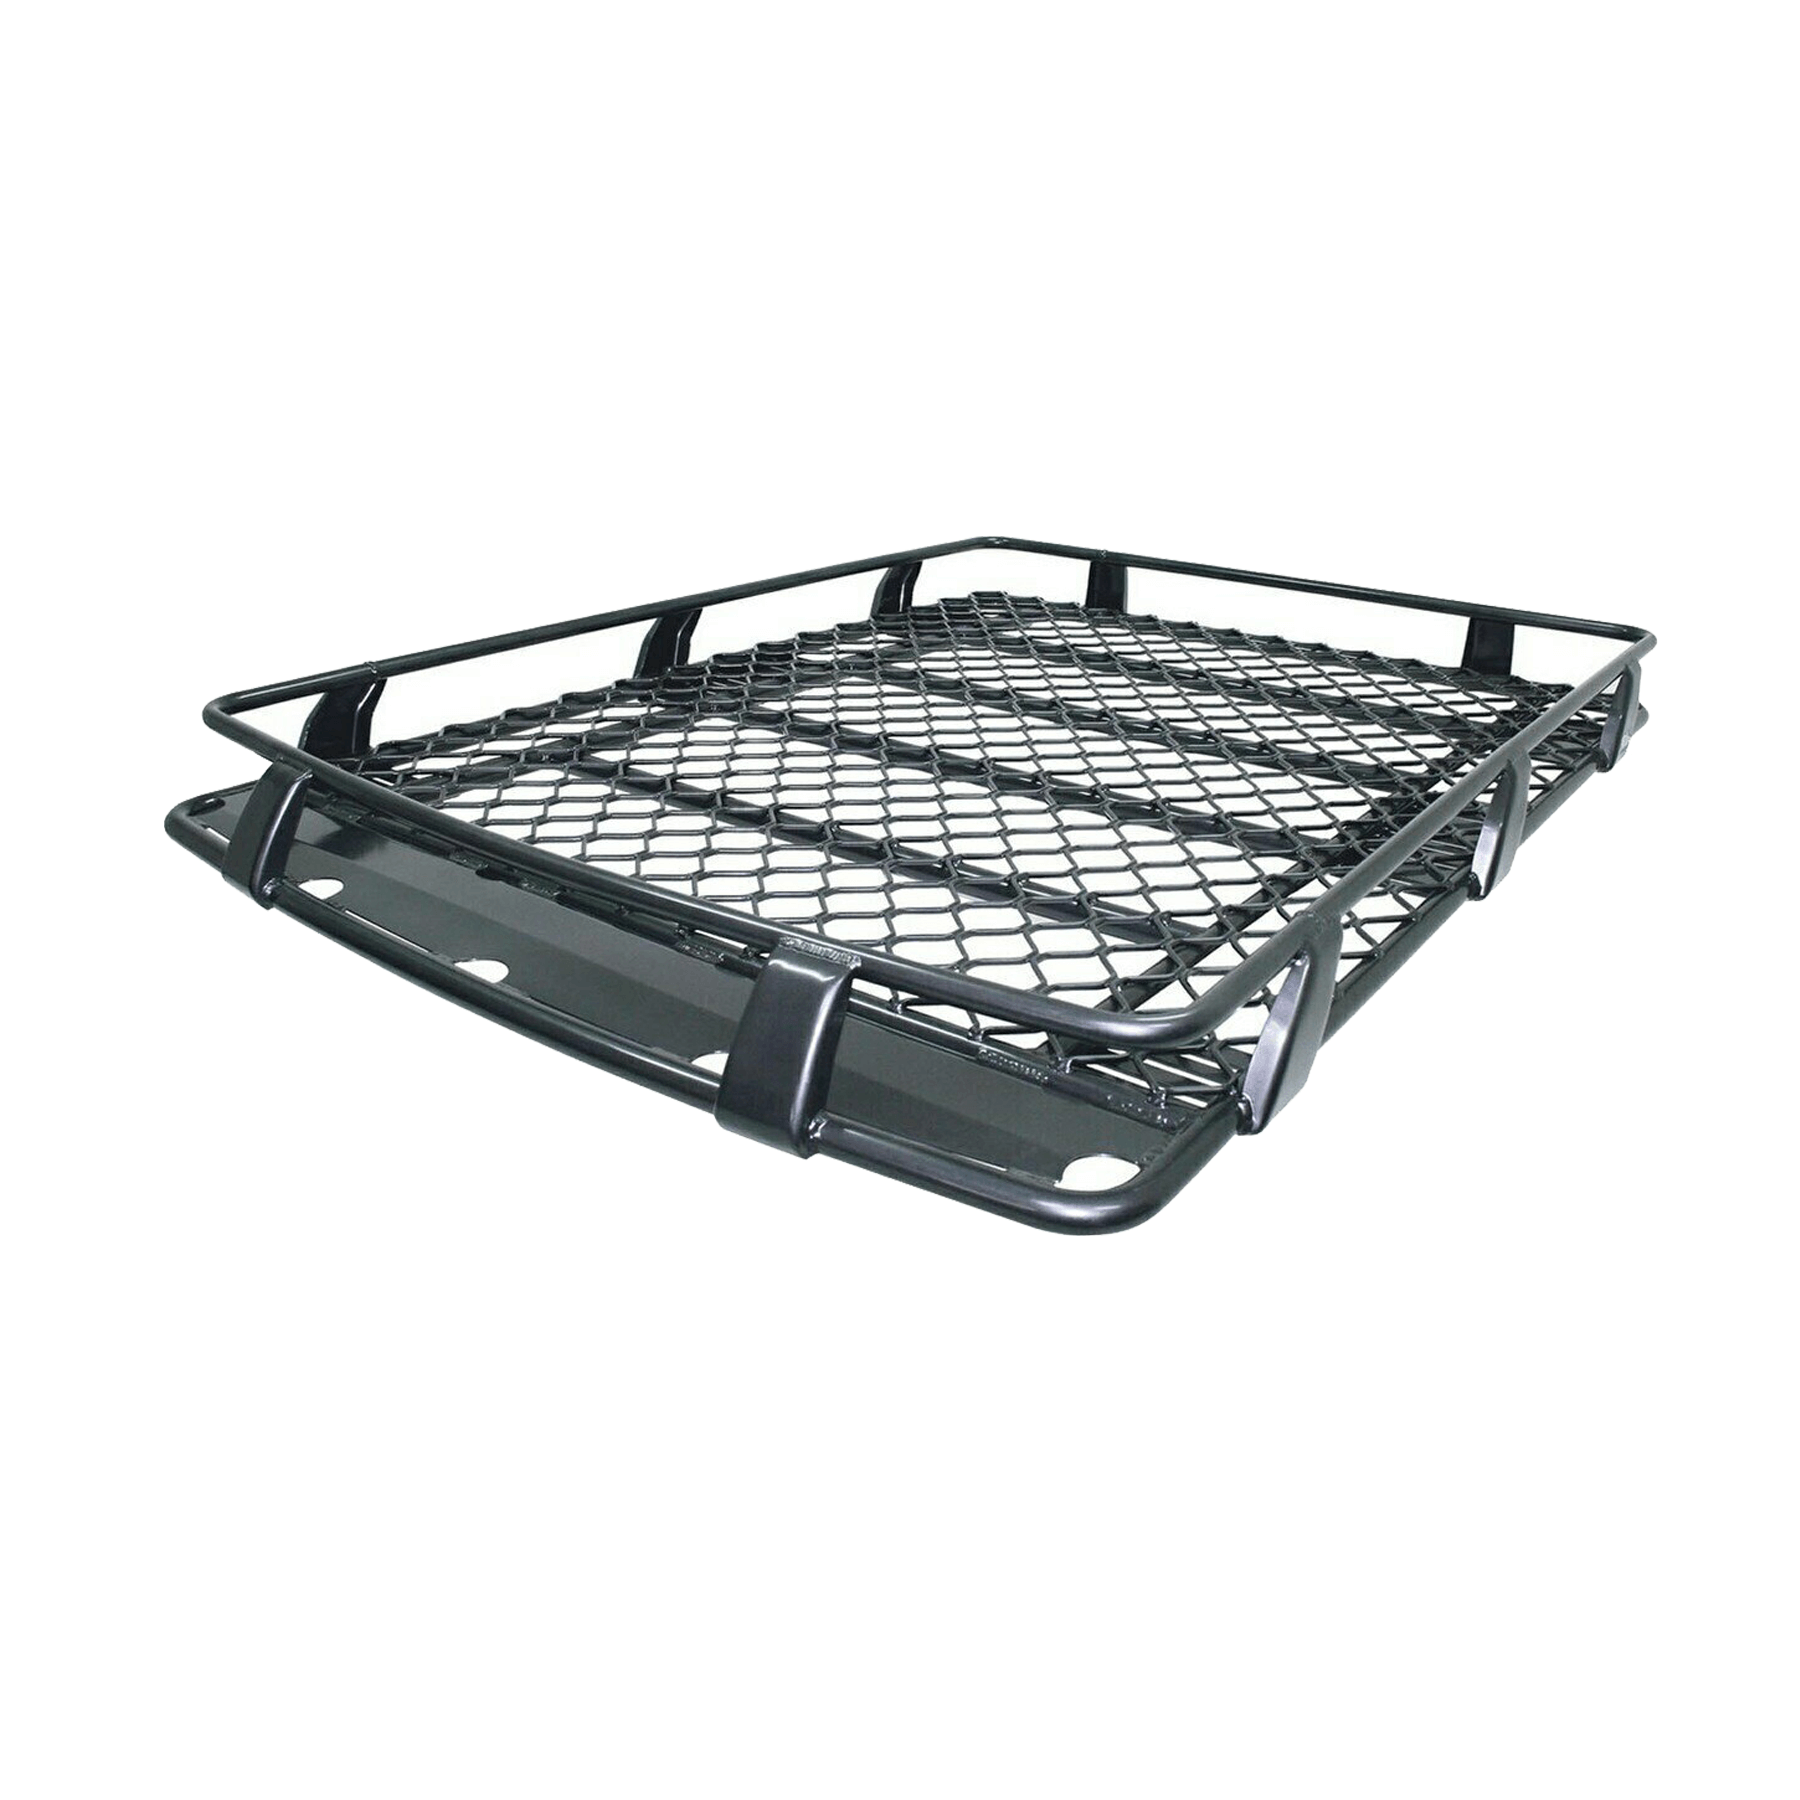 LANDCRUISER 80 SERIES 1990 TO 1998 BASKET ALLOY ROOF RACK – 2.2M X 1.25M (OPEN END)